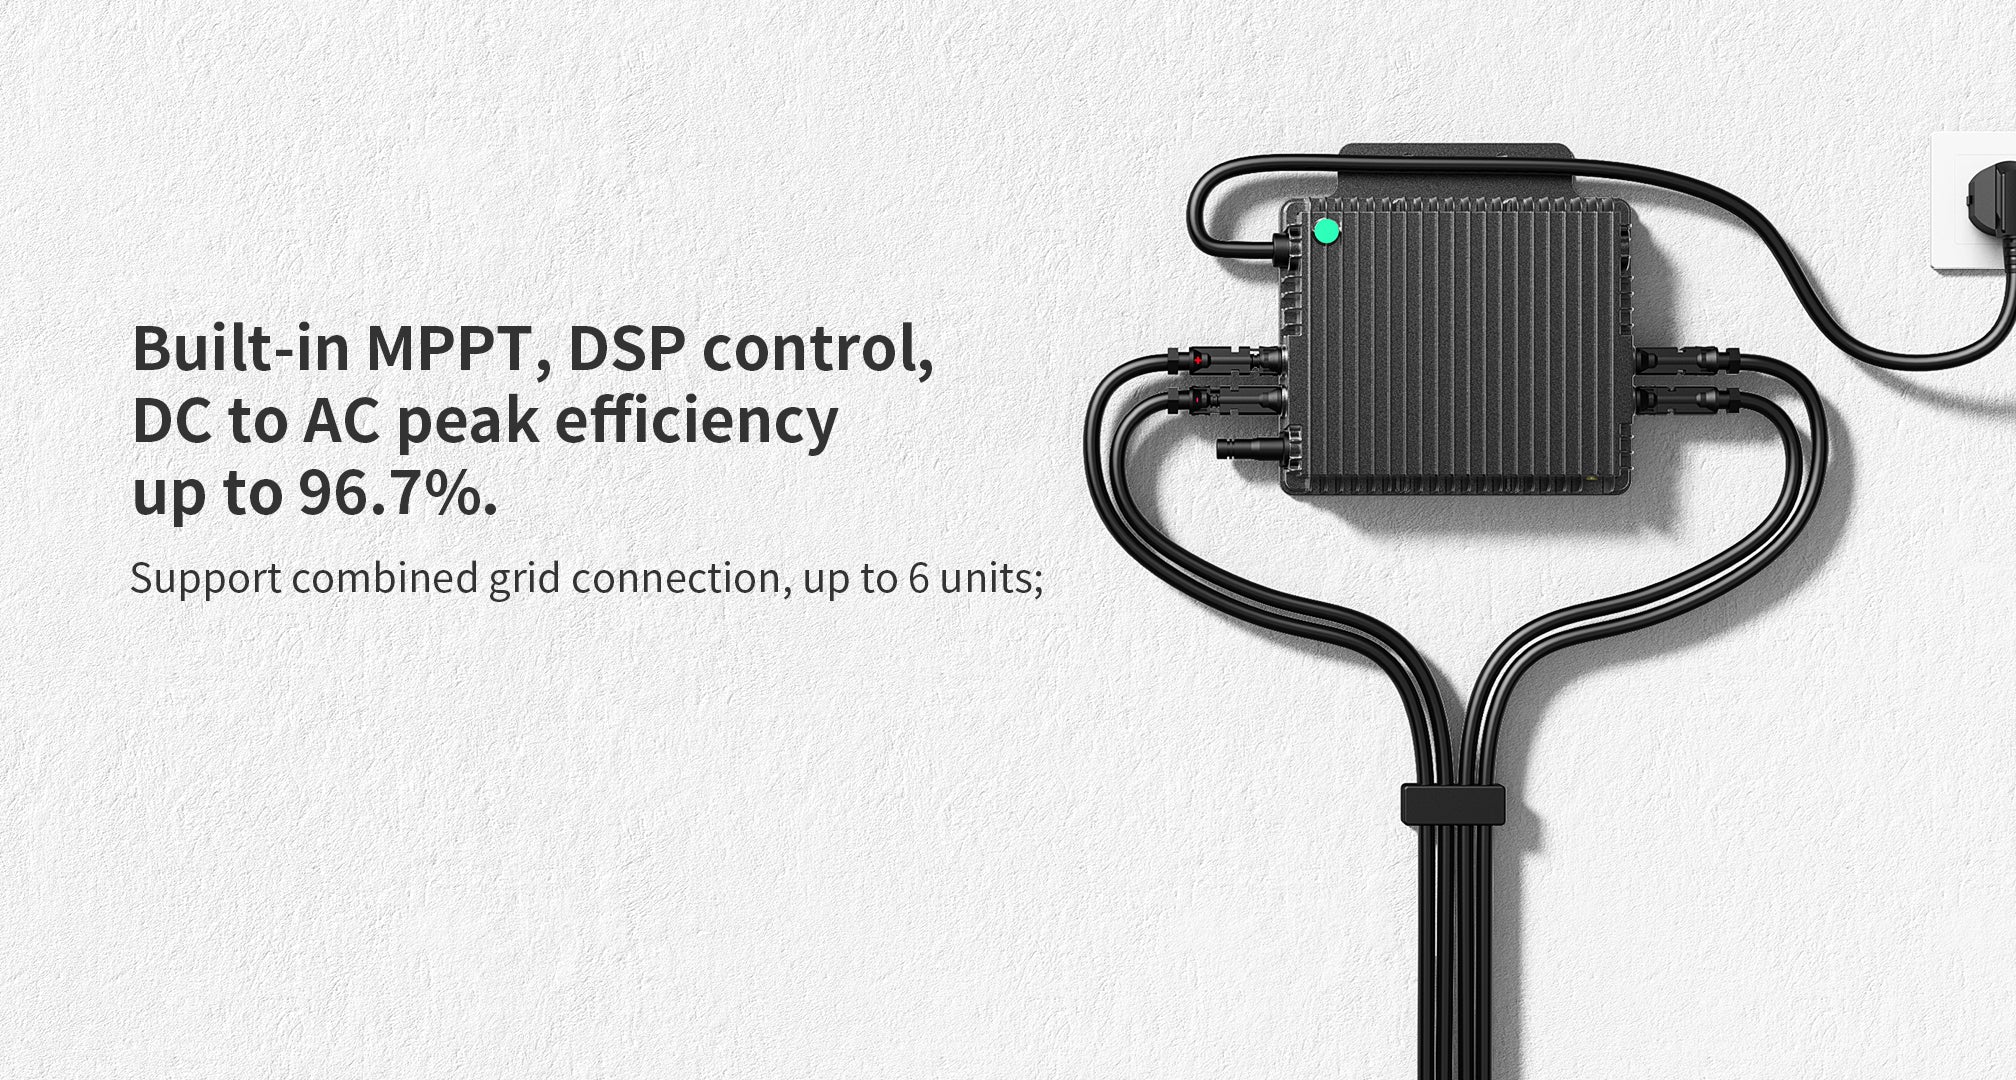 Built-in MPPT, DSP control, DC to AC peak efficiency up to 96.7%.